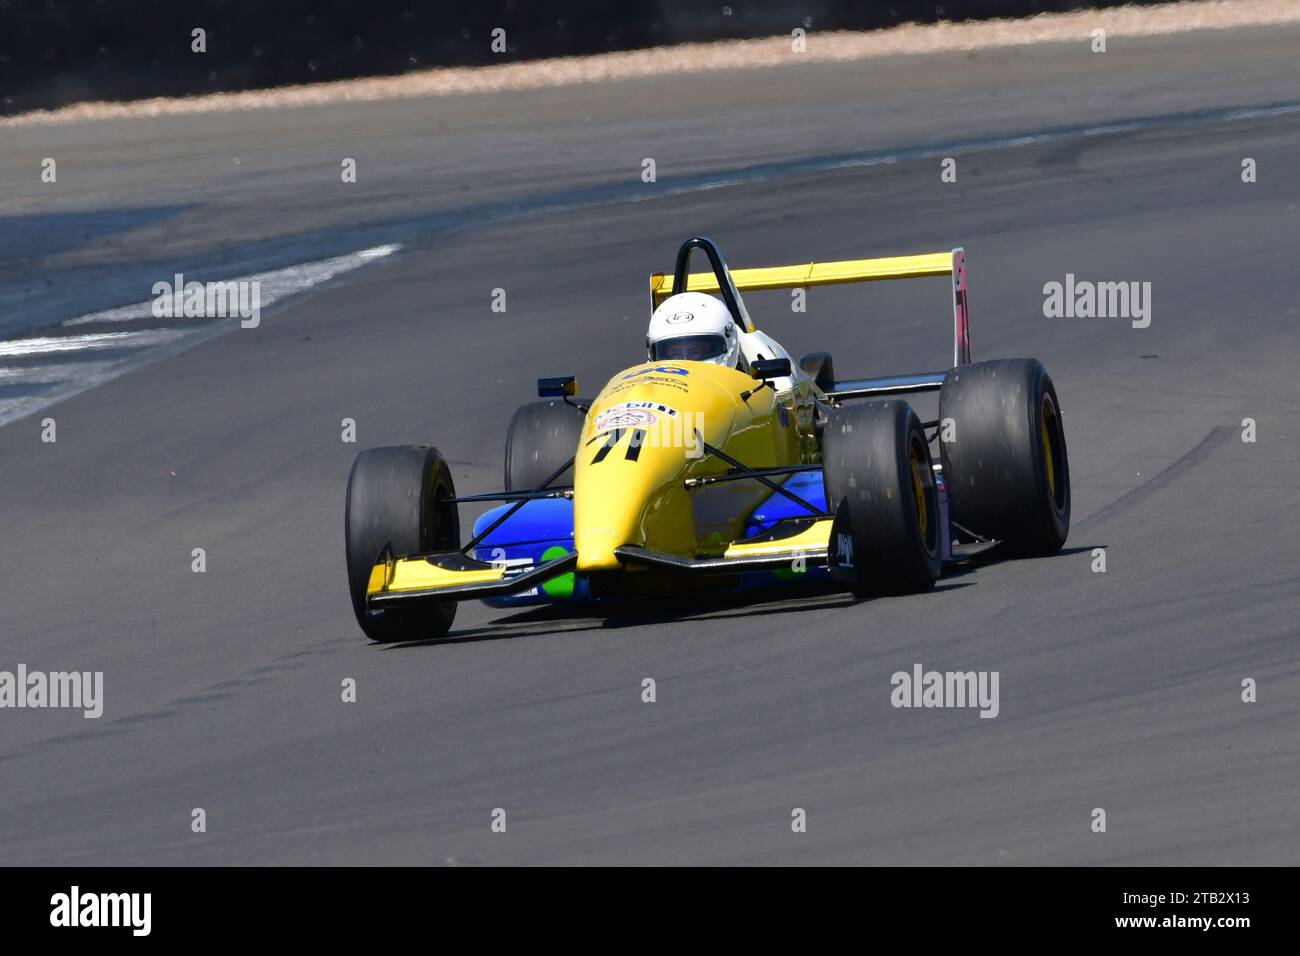 Chris Kite, Dallara F393, Monoposto Championship, Monoposto Racing Club, fifteen minutes of racing after a fifteen minute qualifying session, featurin Stock Photo